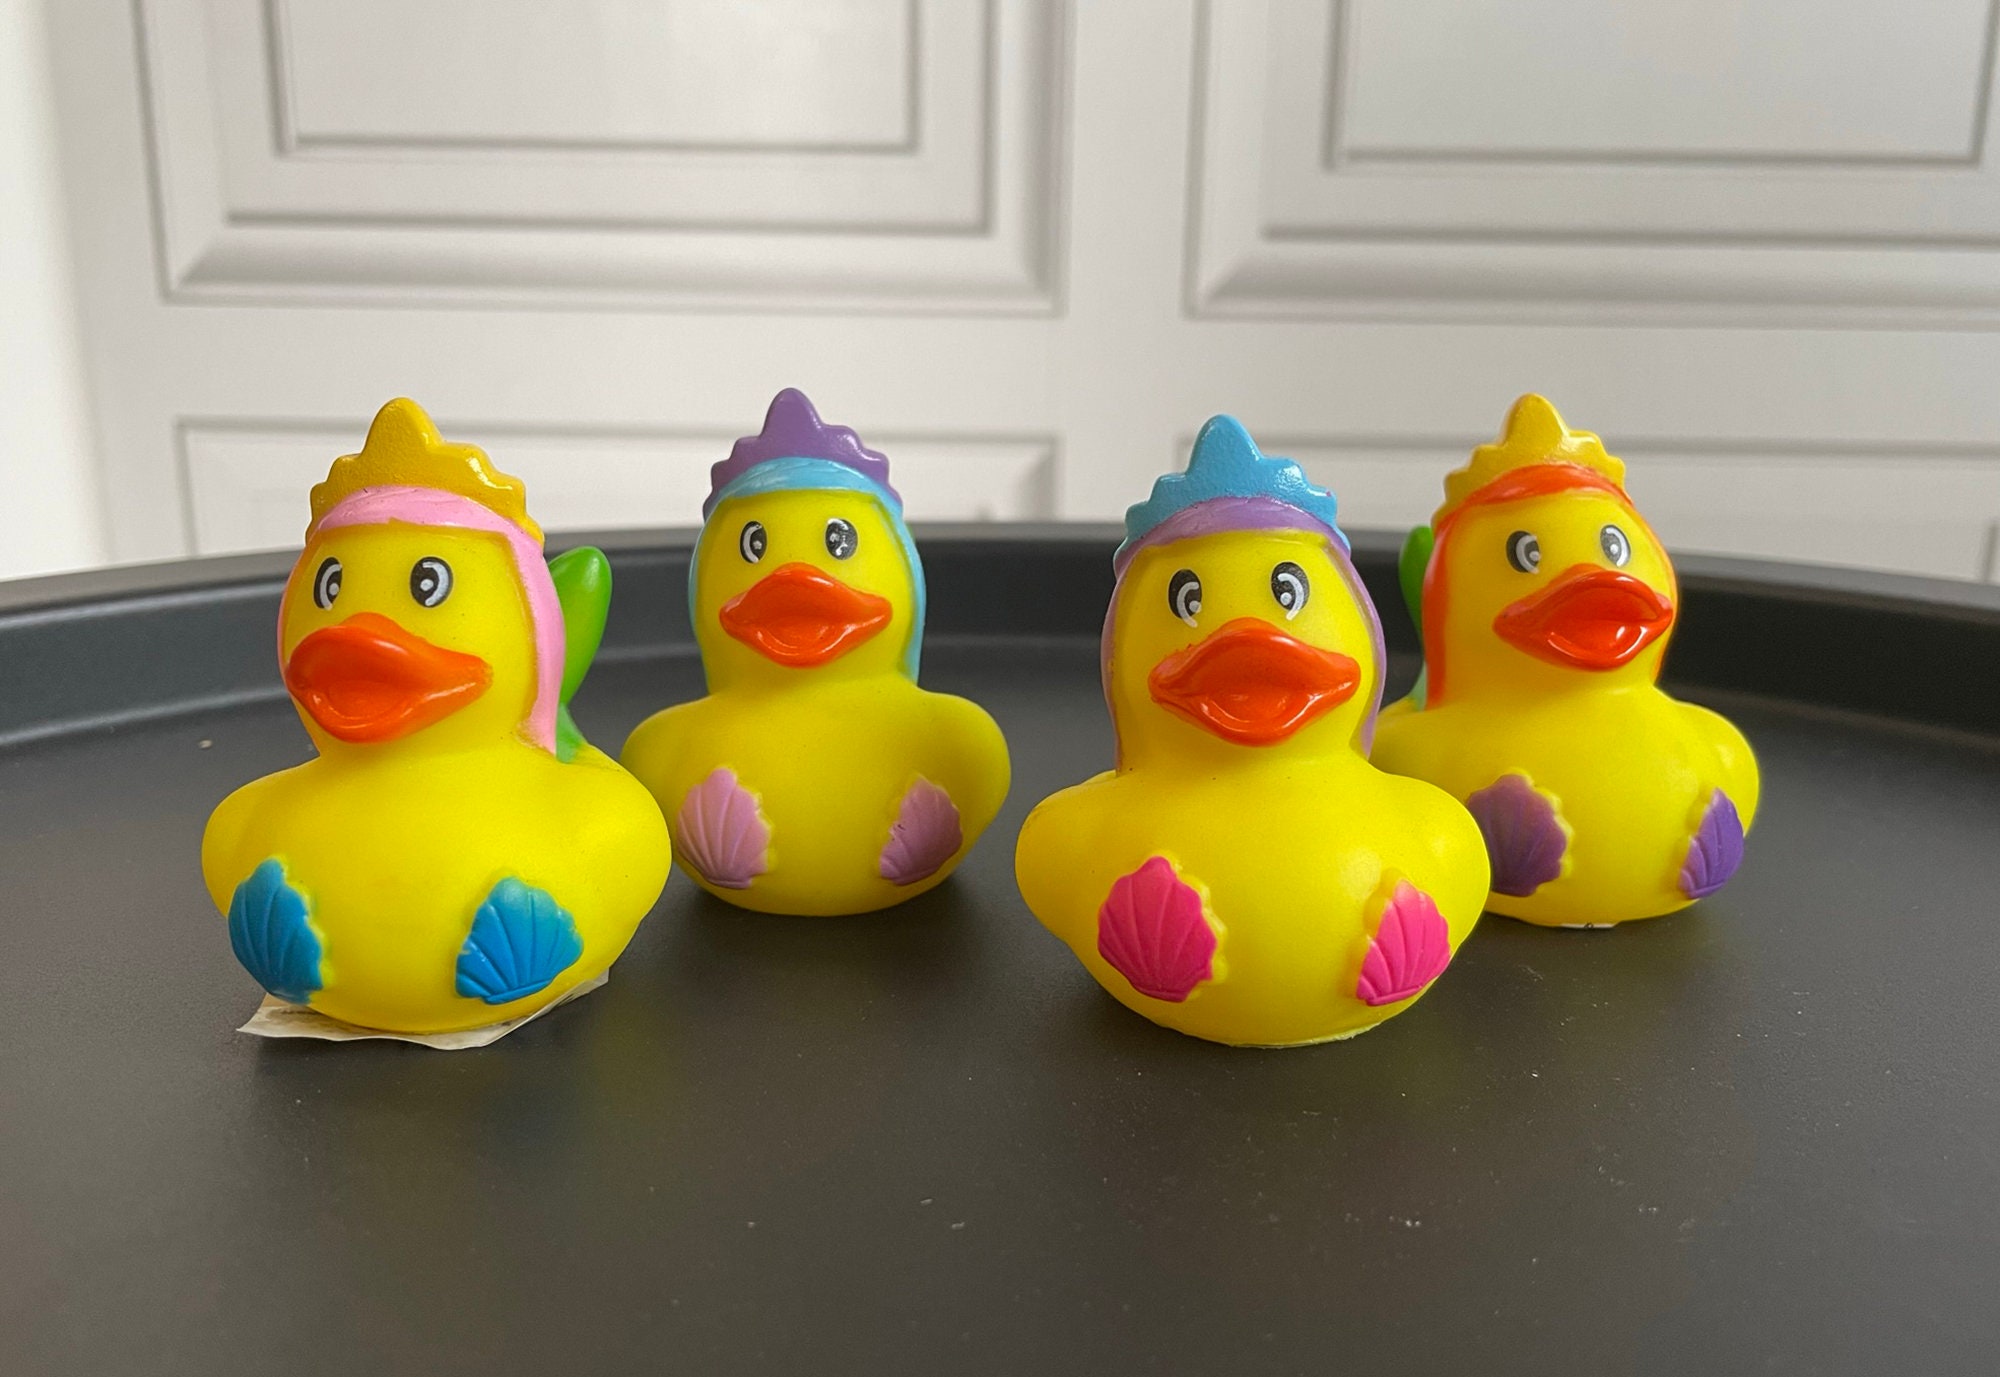 Princess Mermaid Mini Rubber Duck Set: Fun Gift, Wedding Favour, Duck Race  Etc. Cute Set of 4 Mer-ducks in Disguise in Four Bright Colours -   Sweden